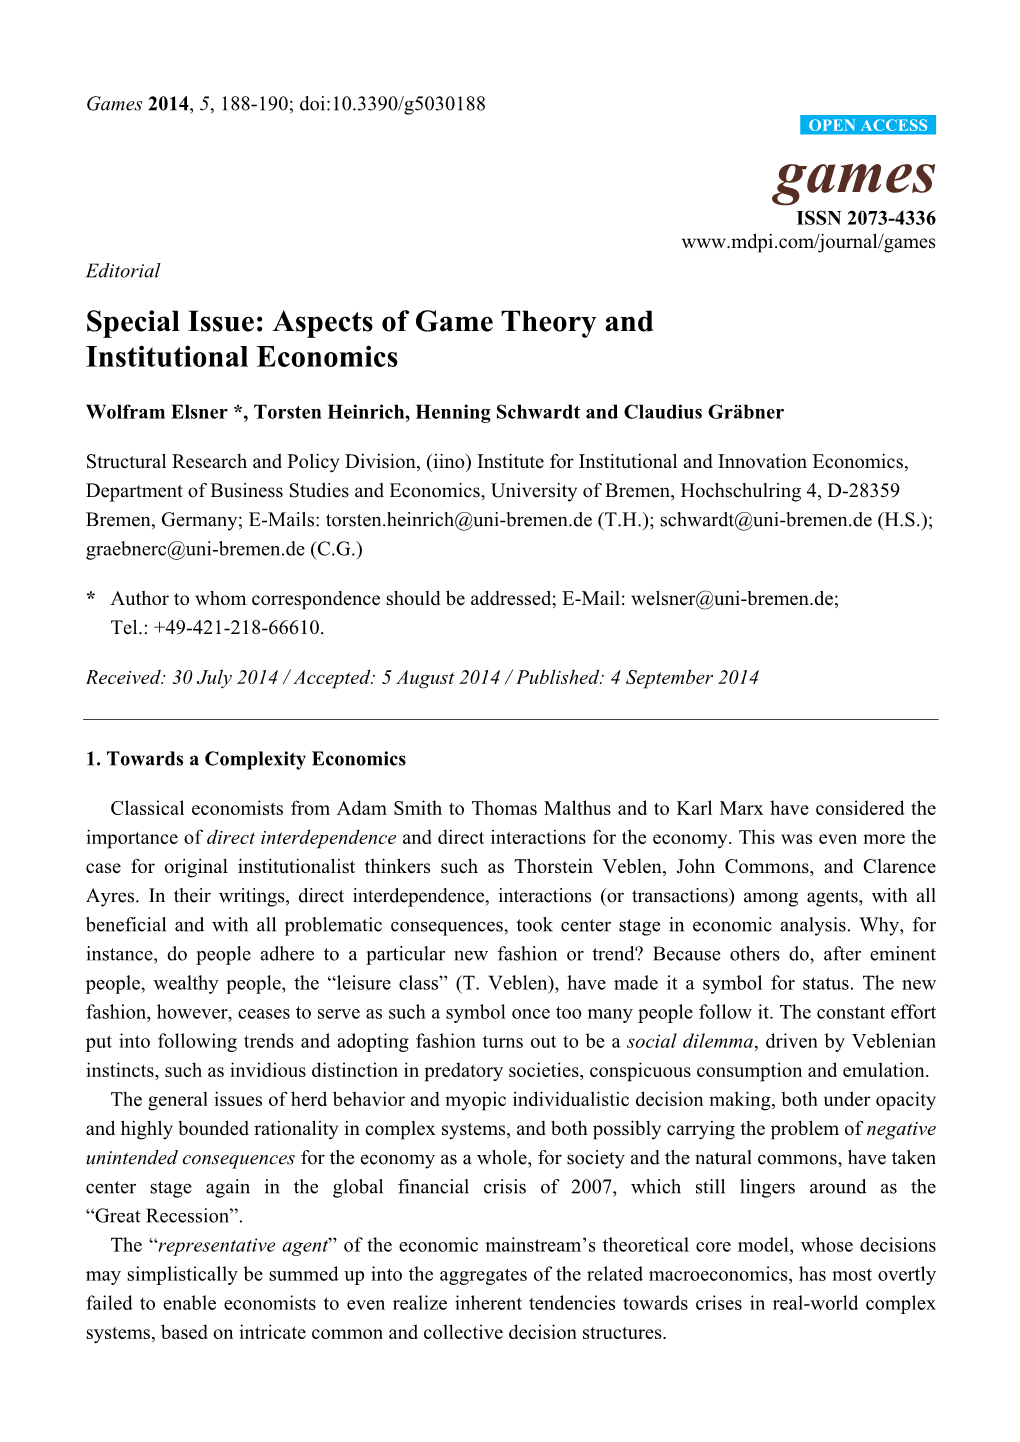 Aspects of Game Theory and Institutional Economics